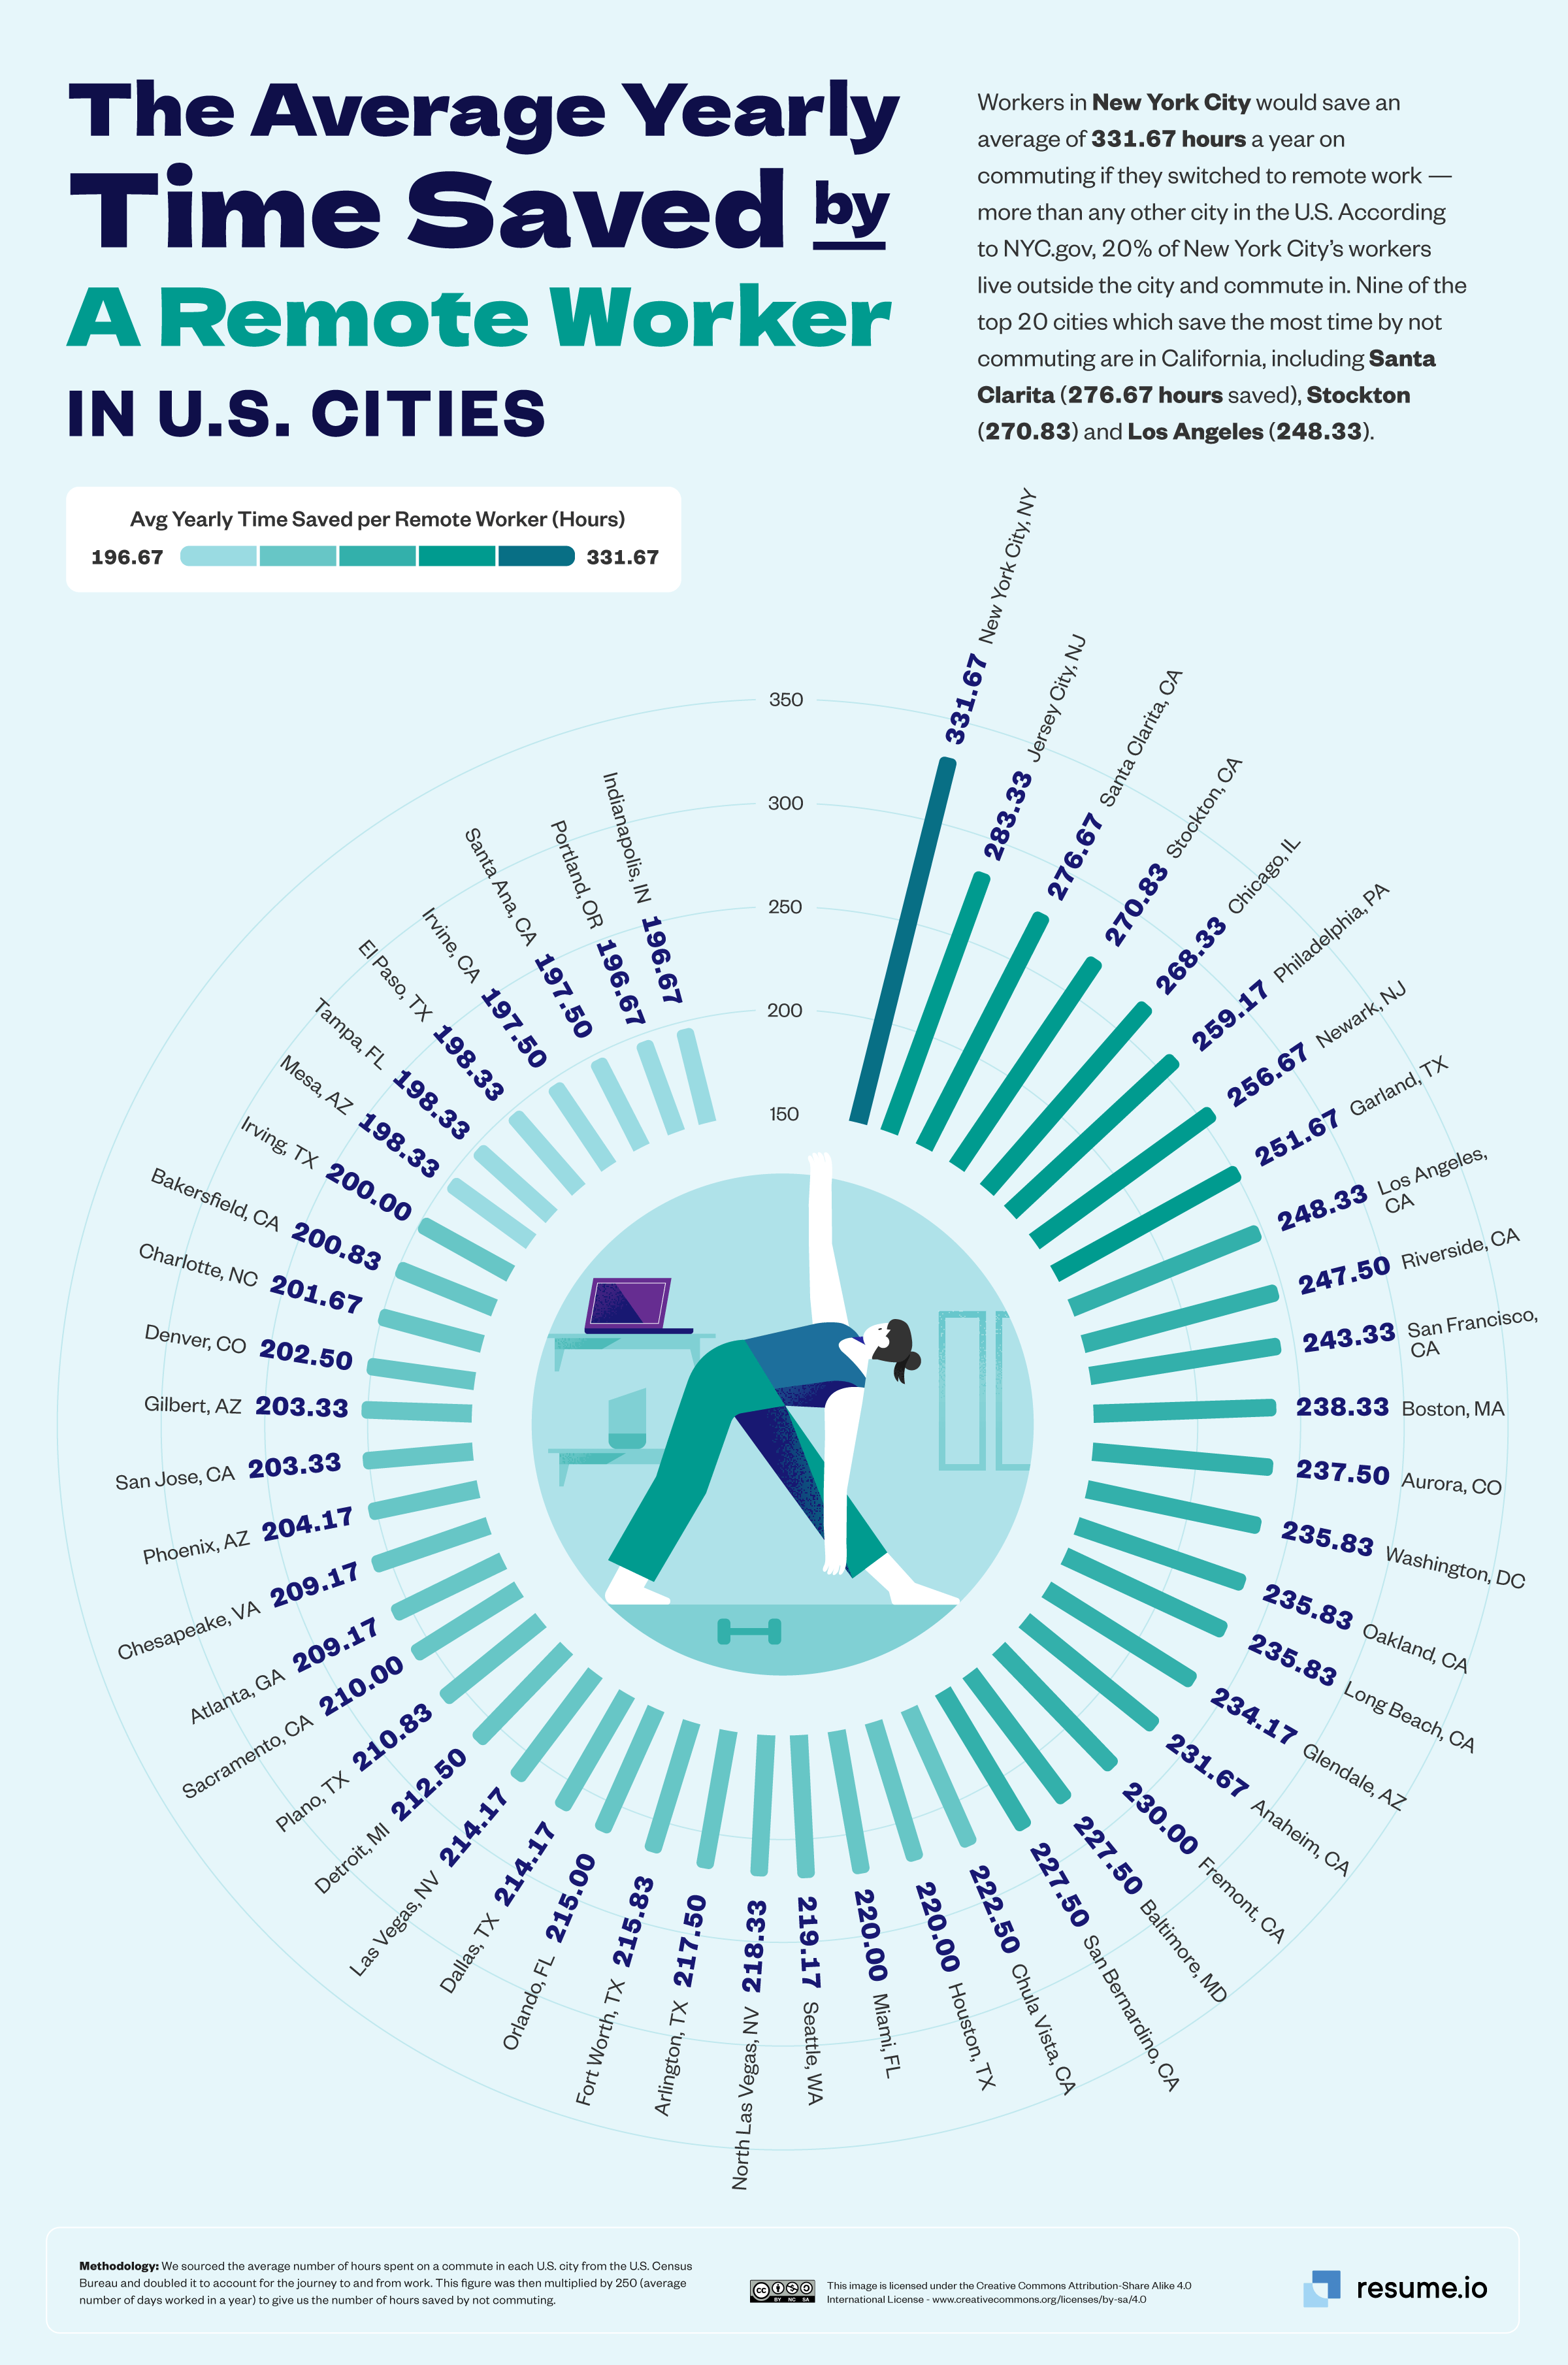 Average Yearly Time Saved by A Remote Worker in US Cities Ranking